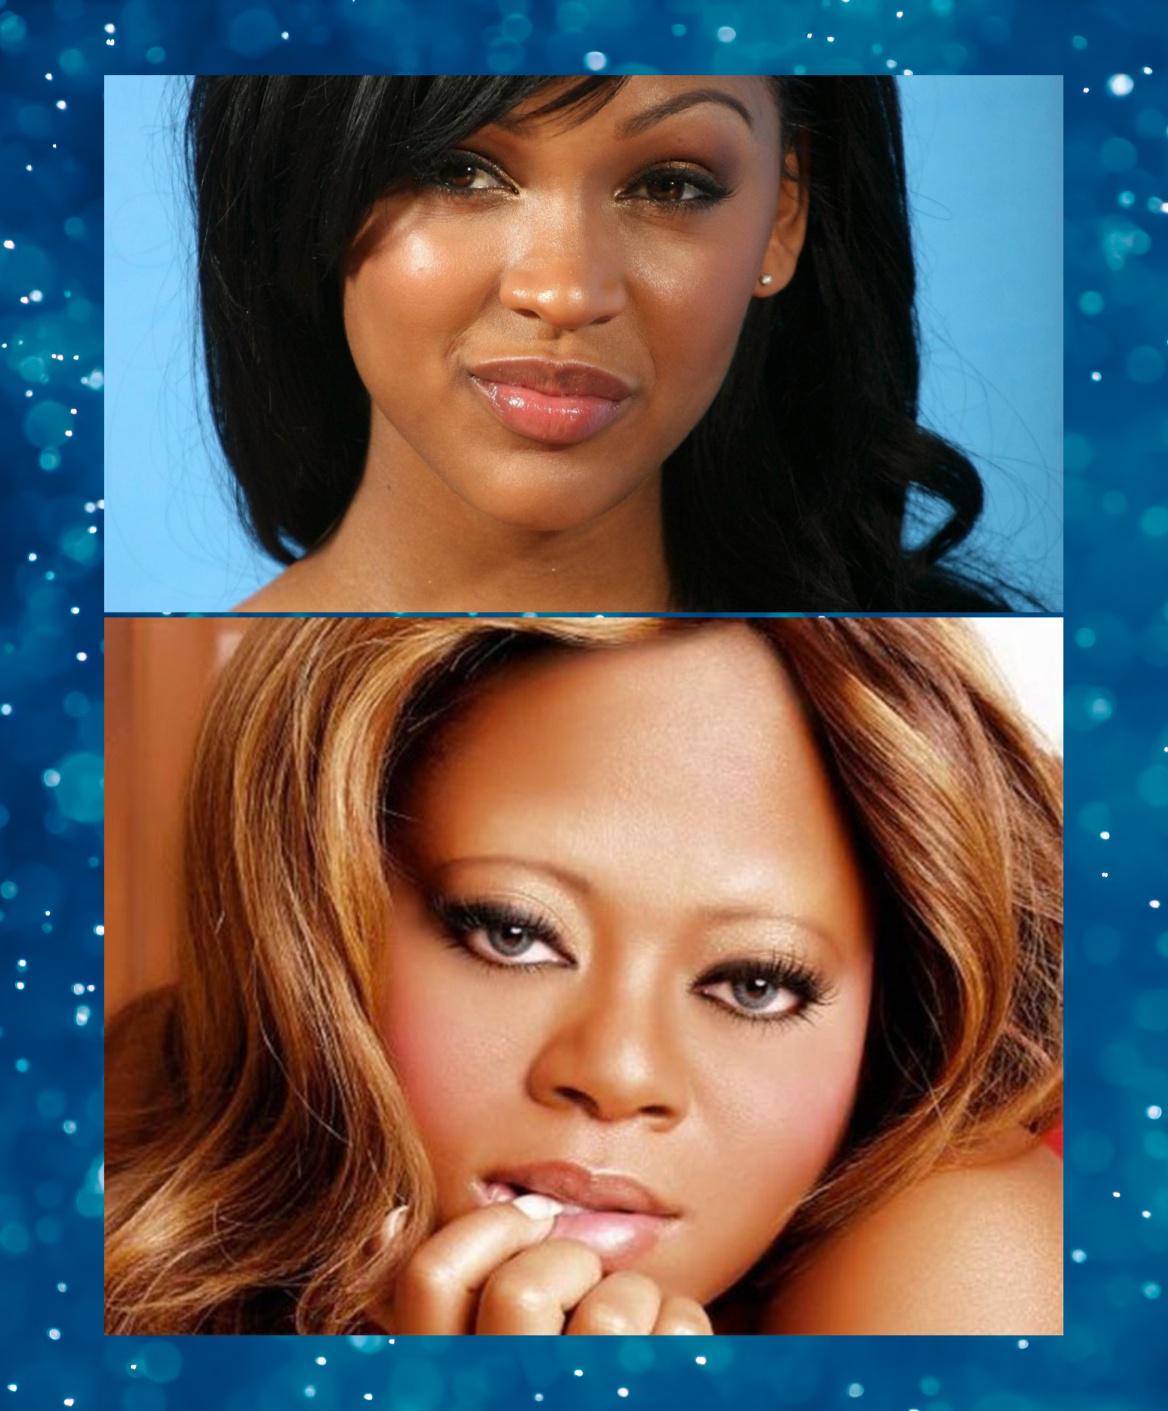   wishes Meagan Good and Countess Vaughn, a very happy birthday  